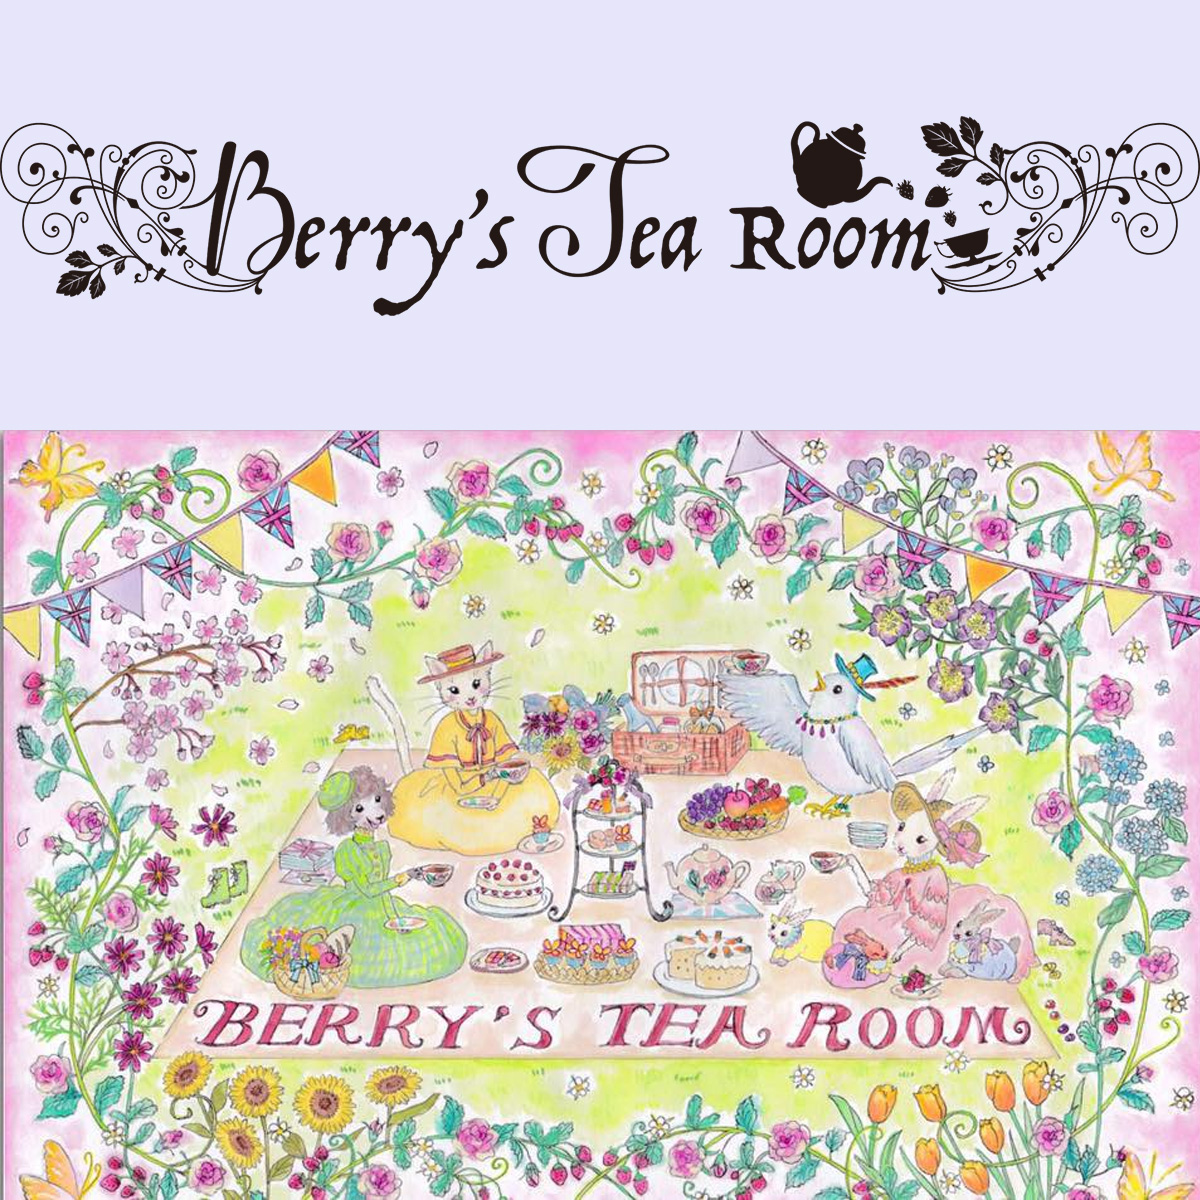 About BERRY’S TEA ROOM